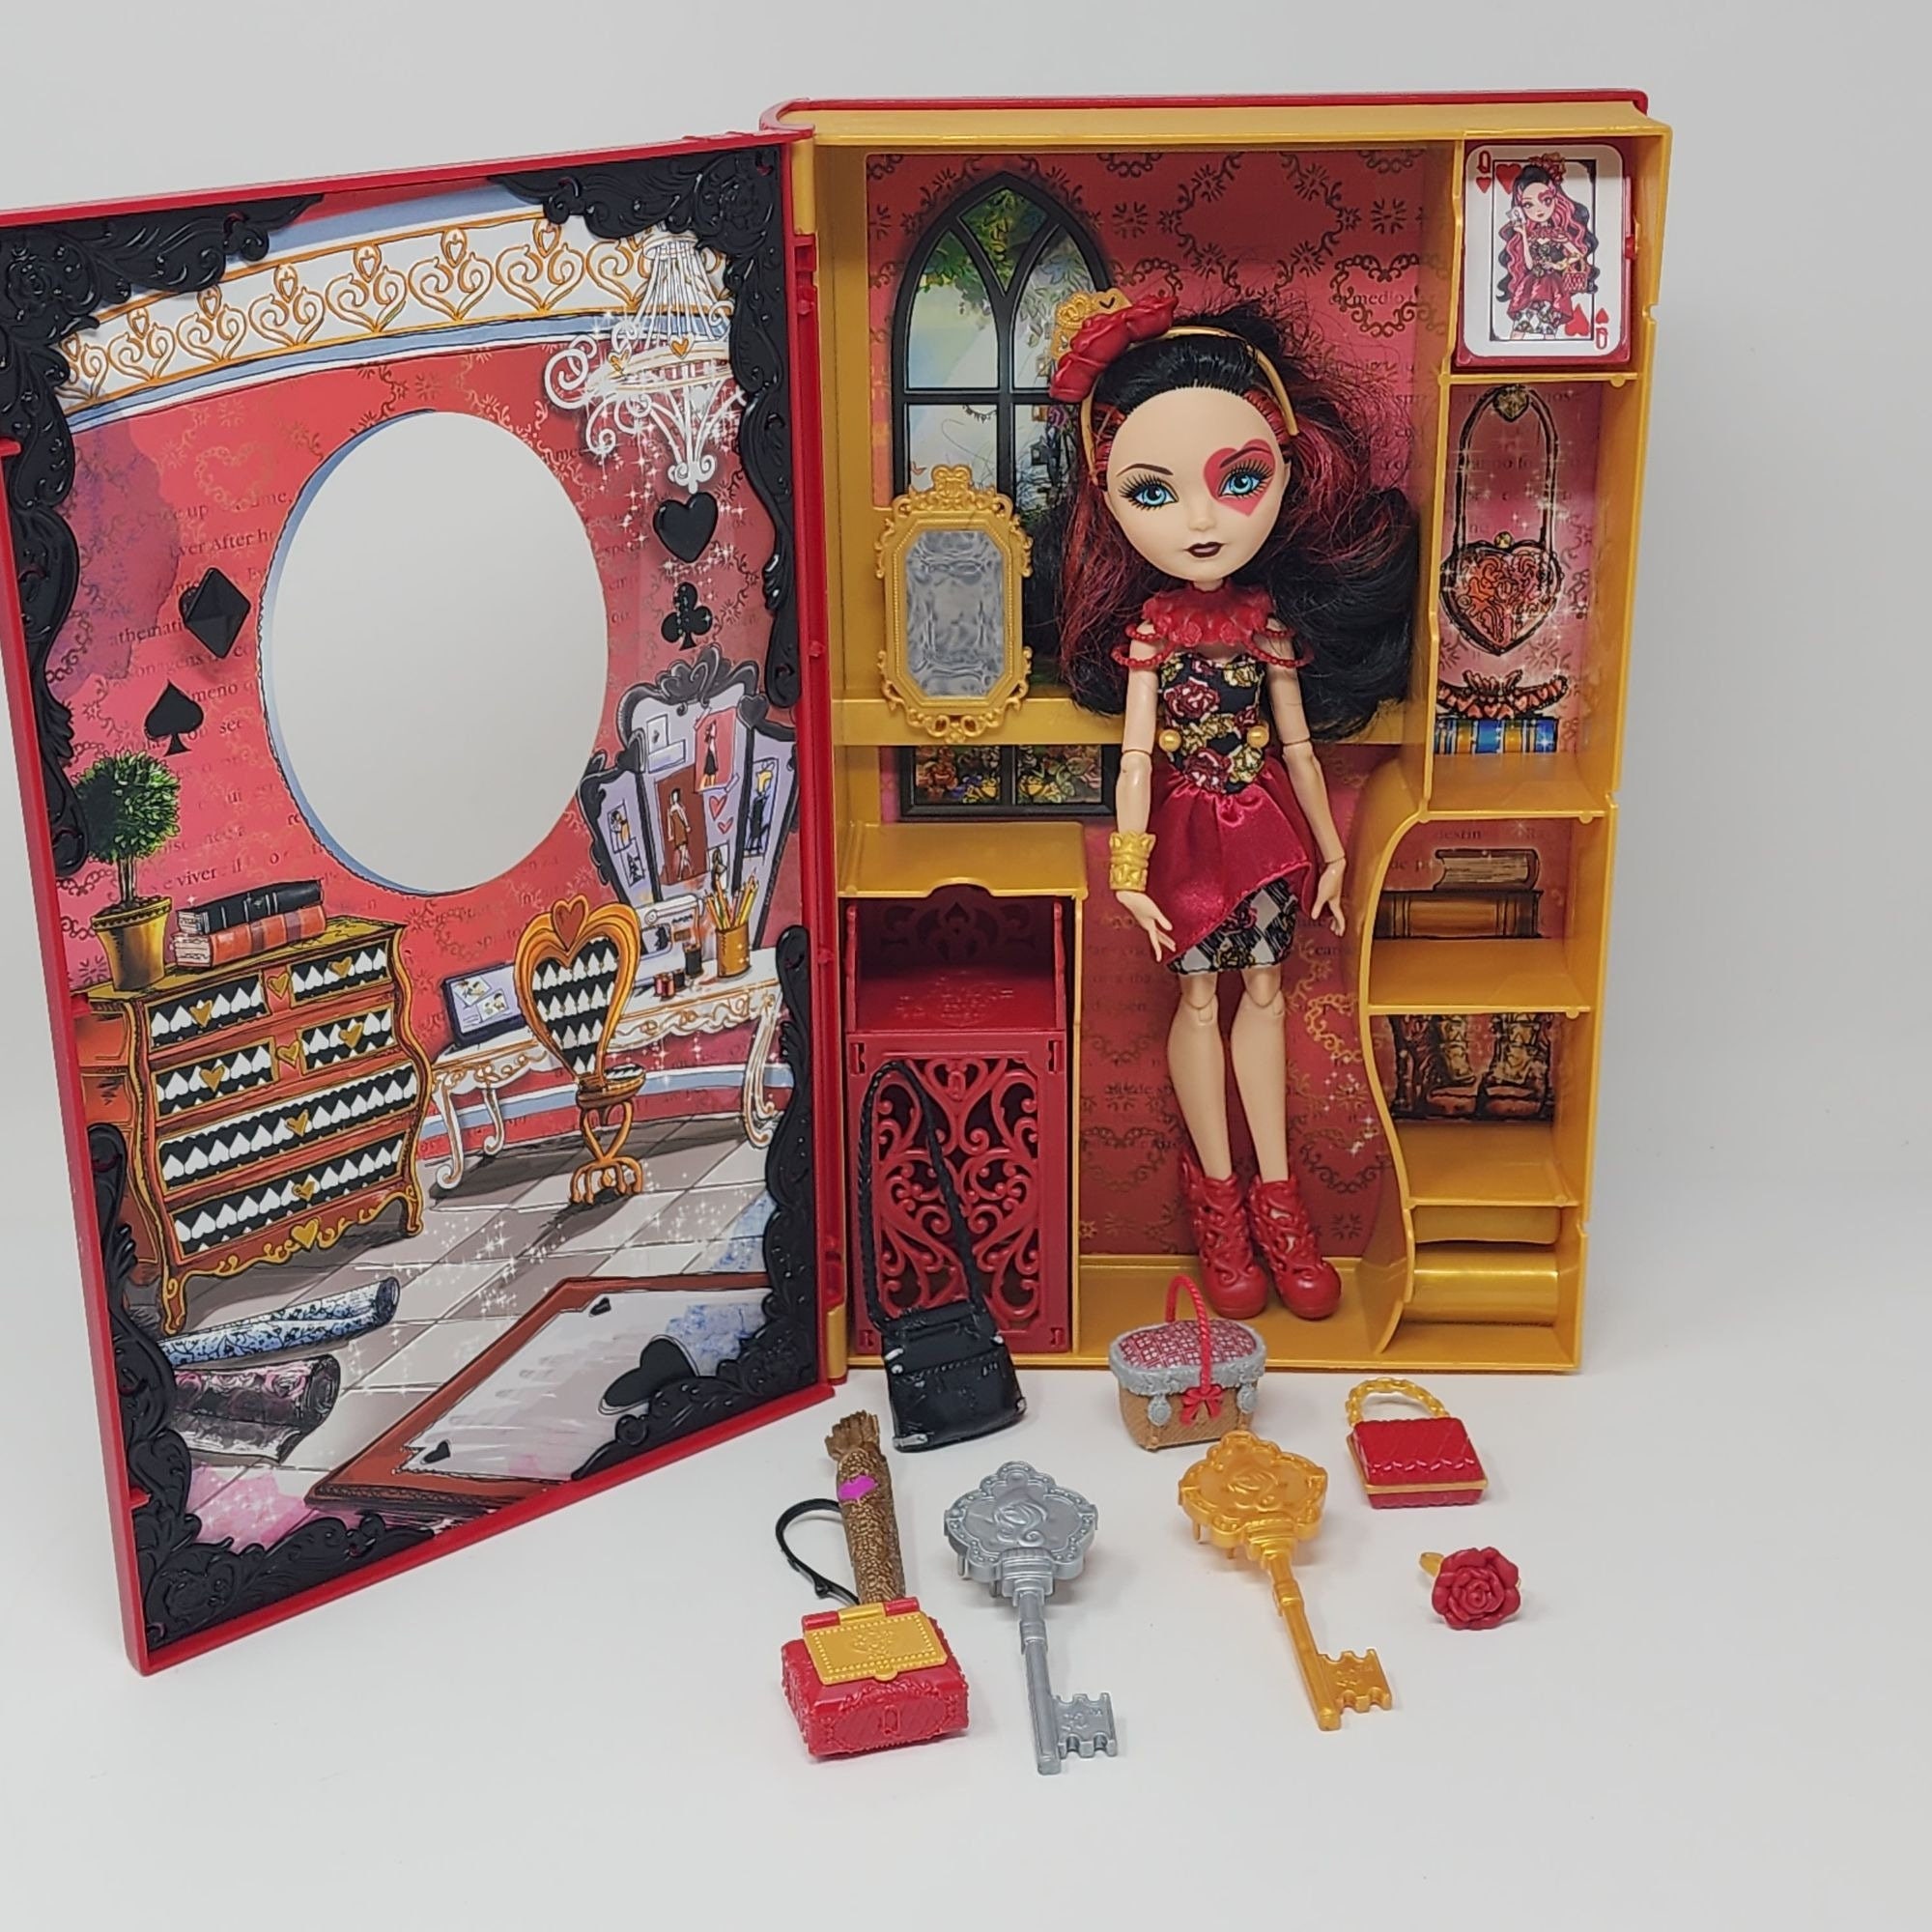 Ever After High Way Too Wonderland Lizzie Hearts Doll for sale online